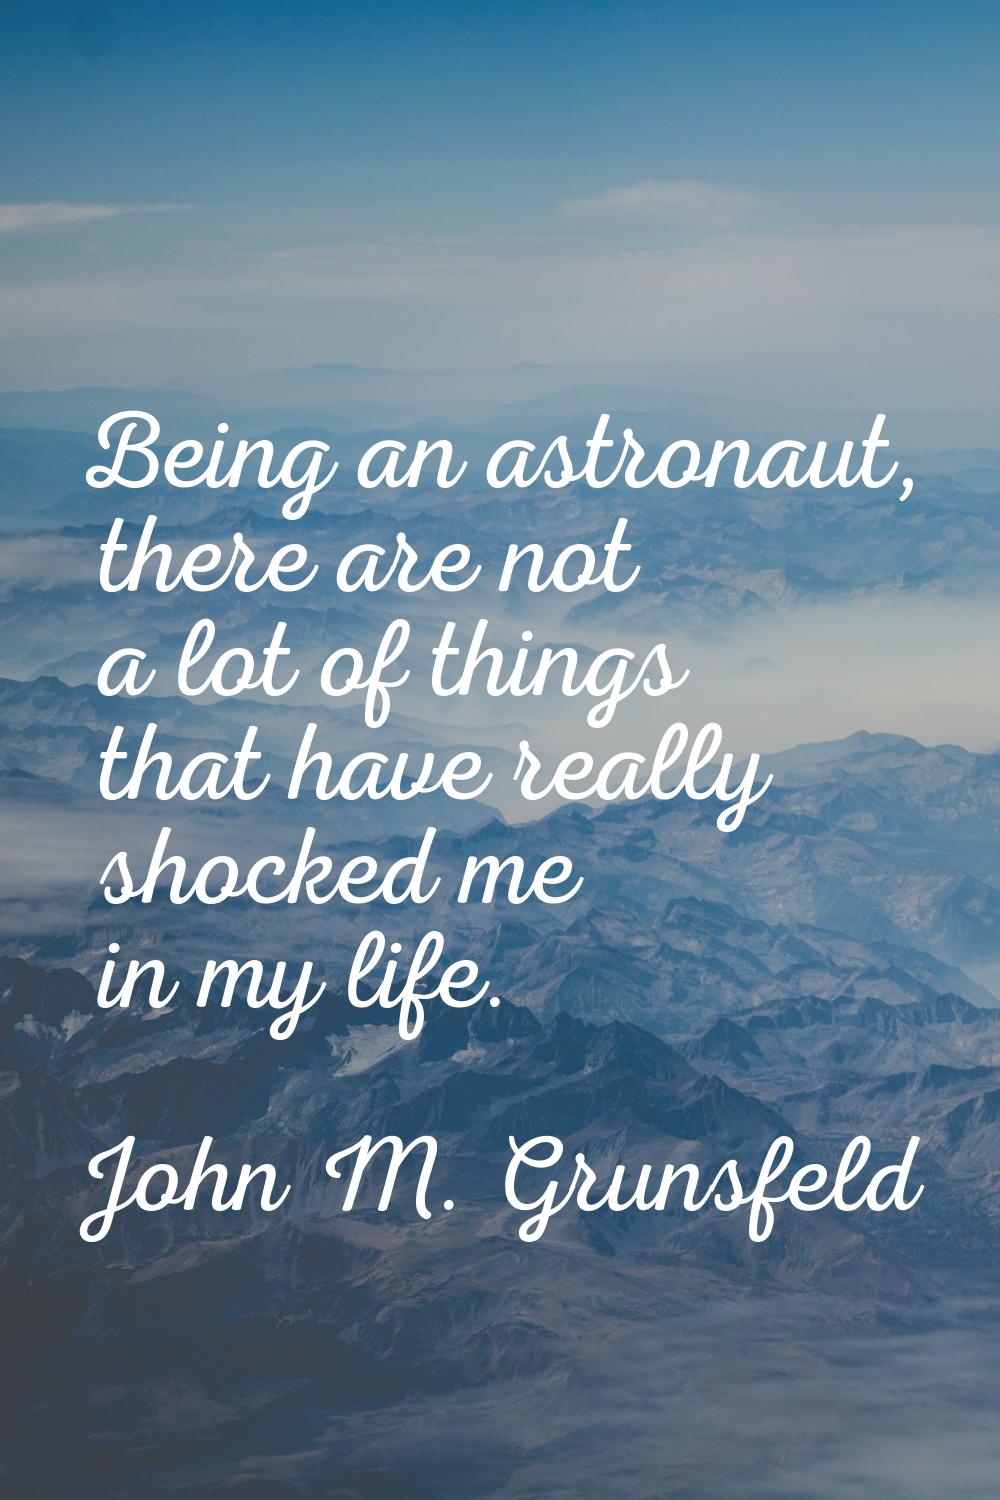 Being an astronaut, there are not a lot of things that have really shocked me in my life.